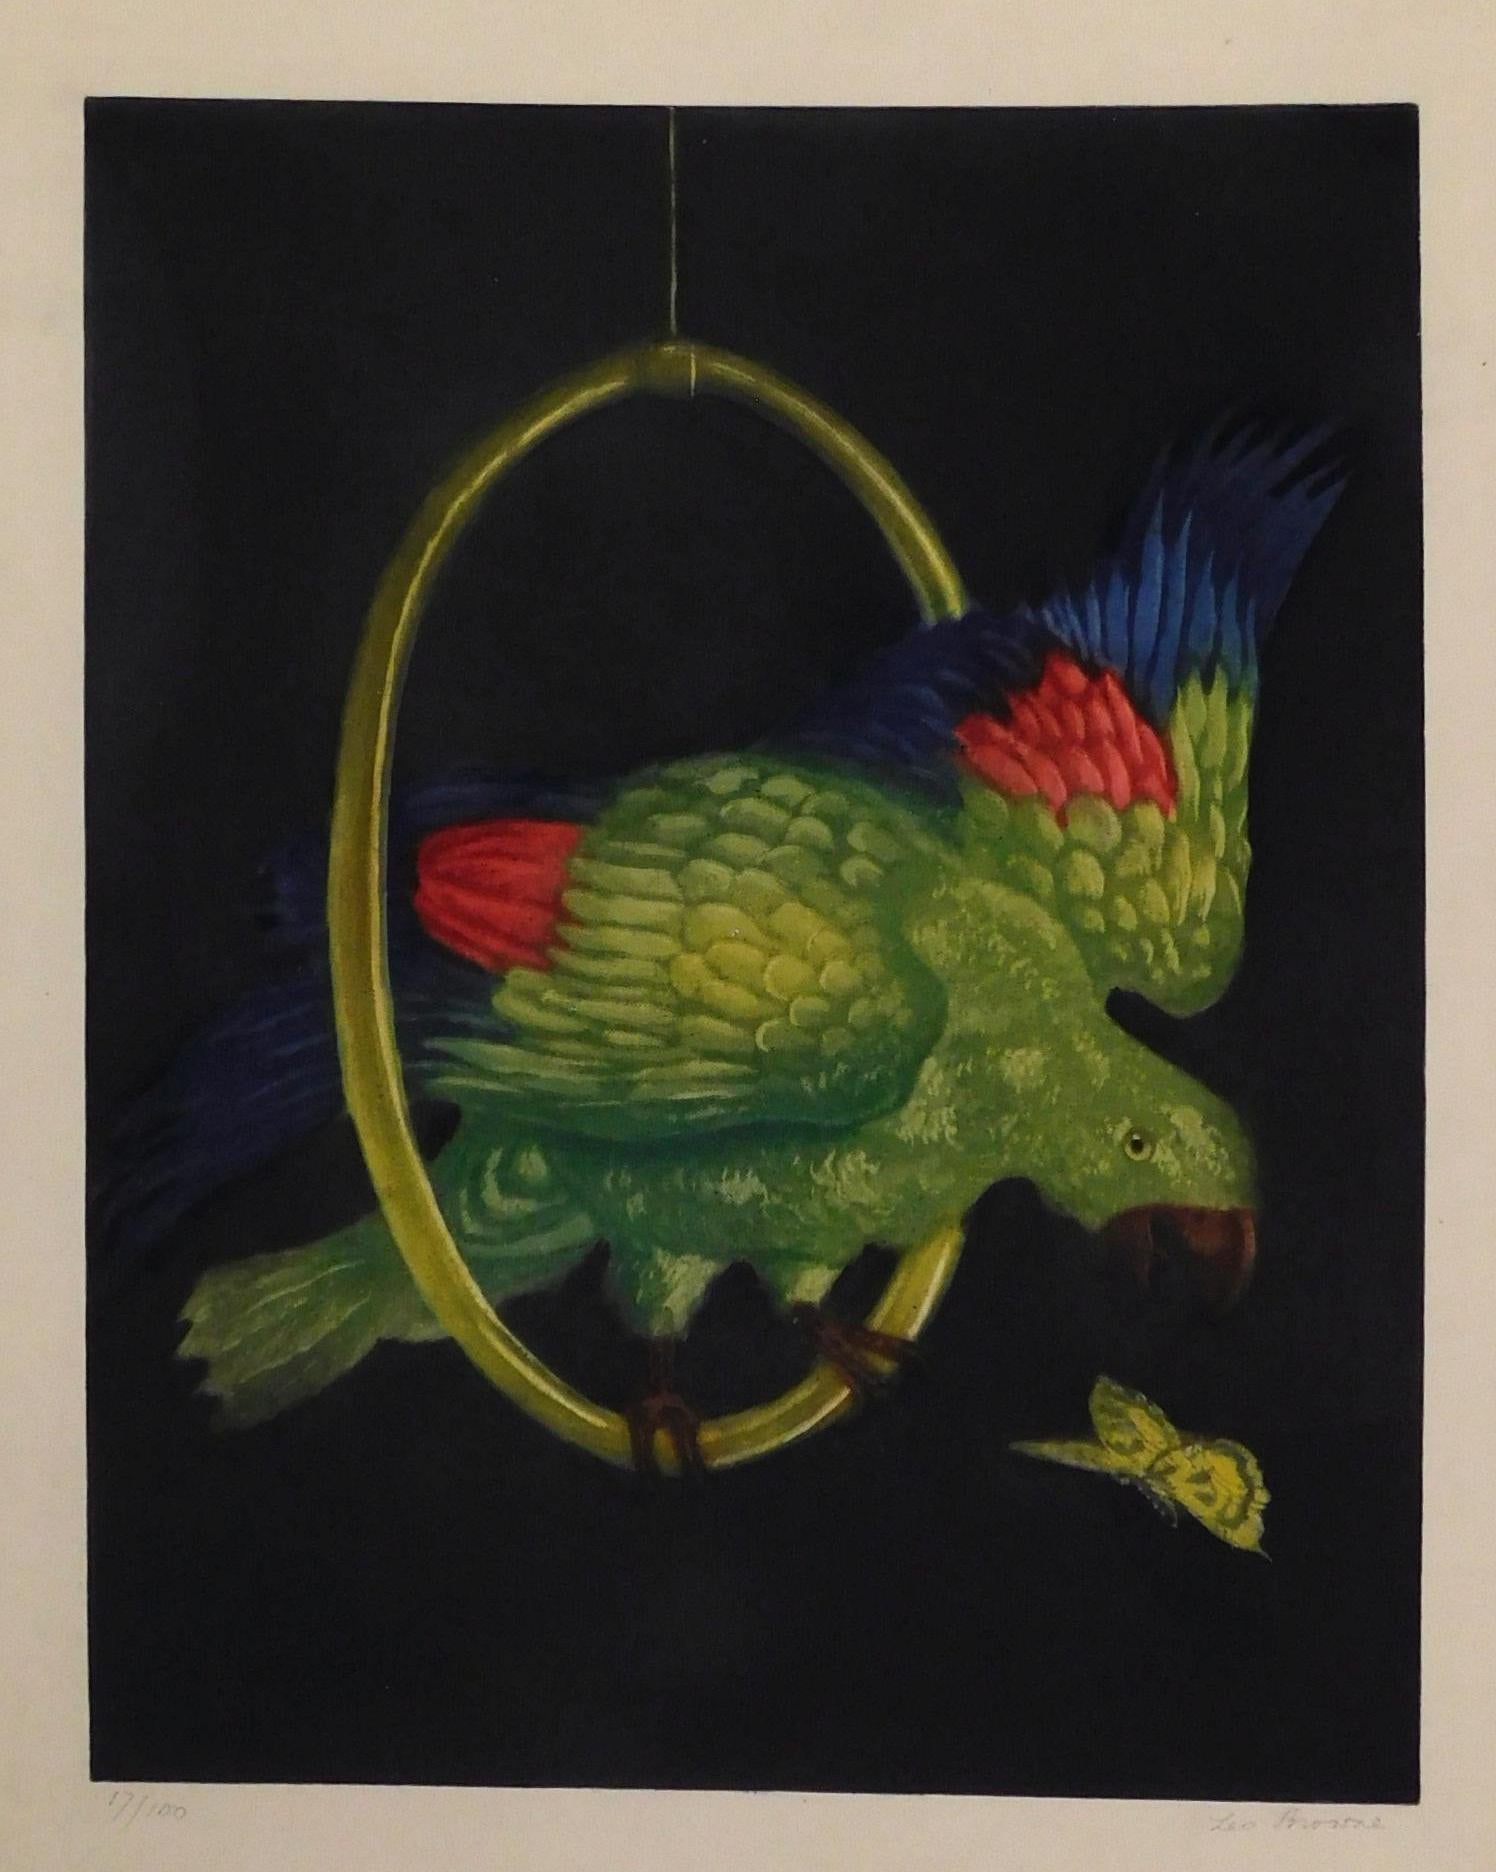 Beautiful color etching by Leo Browne. Created circa 1930's and 1940's.
Image size: 14 x 11 inches. Sheet size: 19 5/8 x 15 1/4
The print is in excellent condition and presents in a 24 x 20 inch 2 ply museum mat.
Pencil signed lower right. Edition